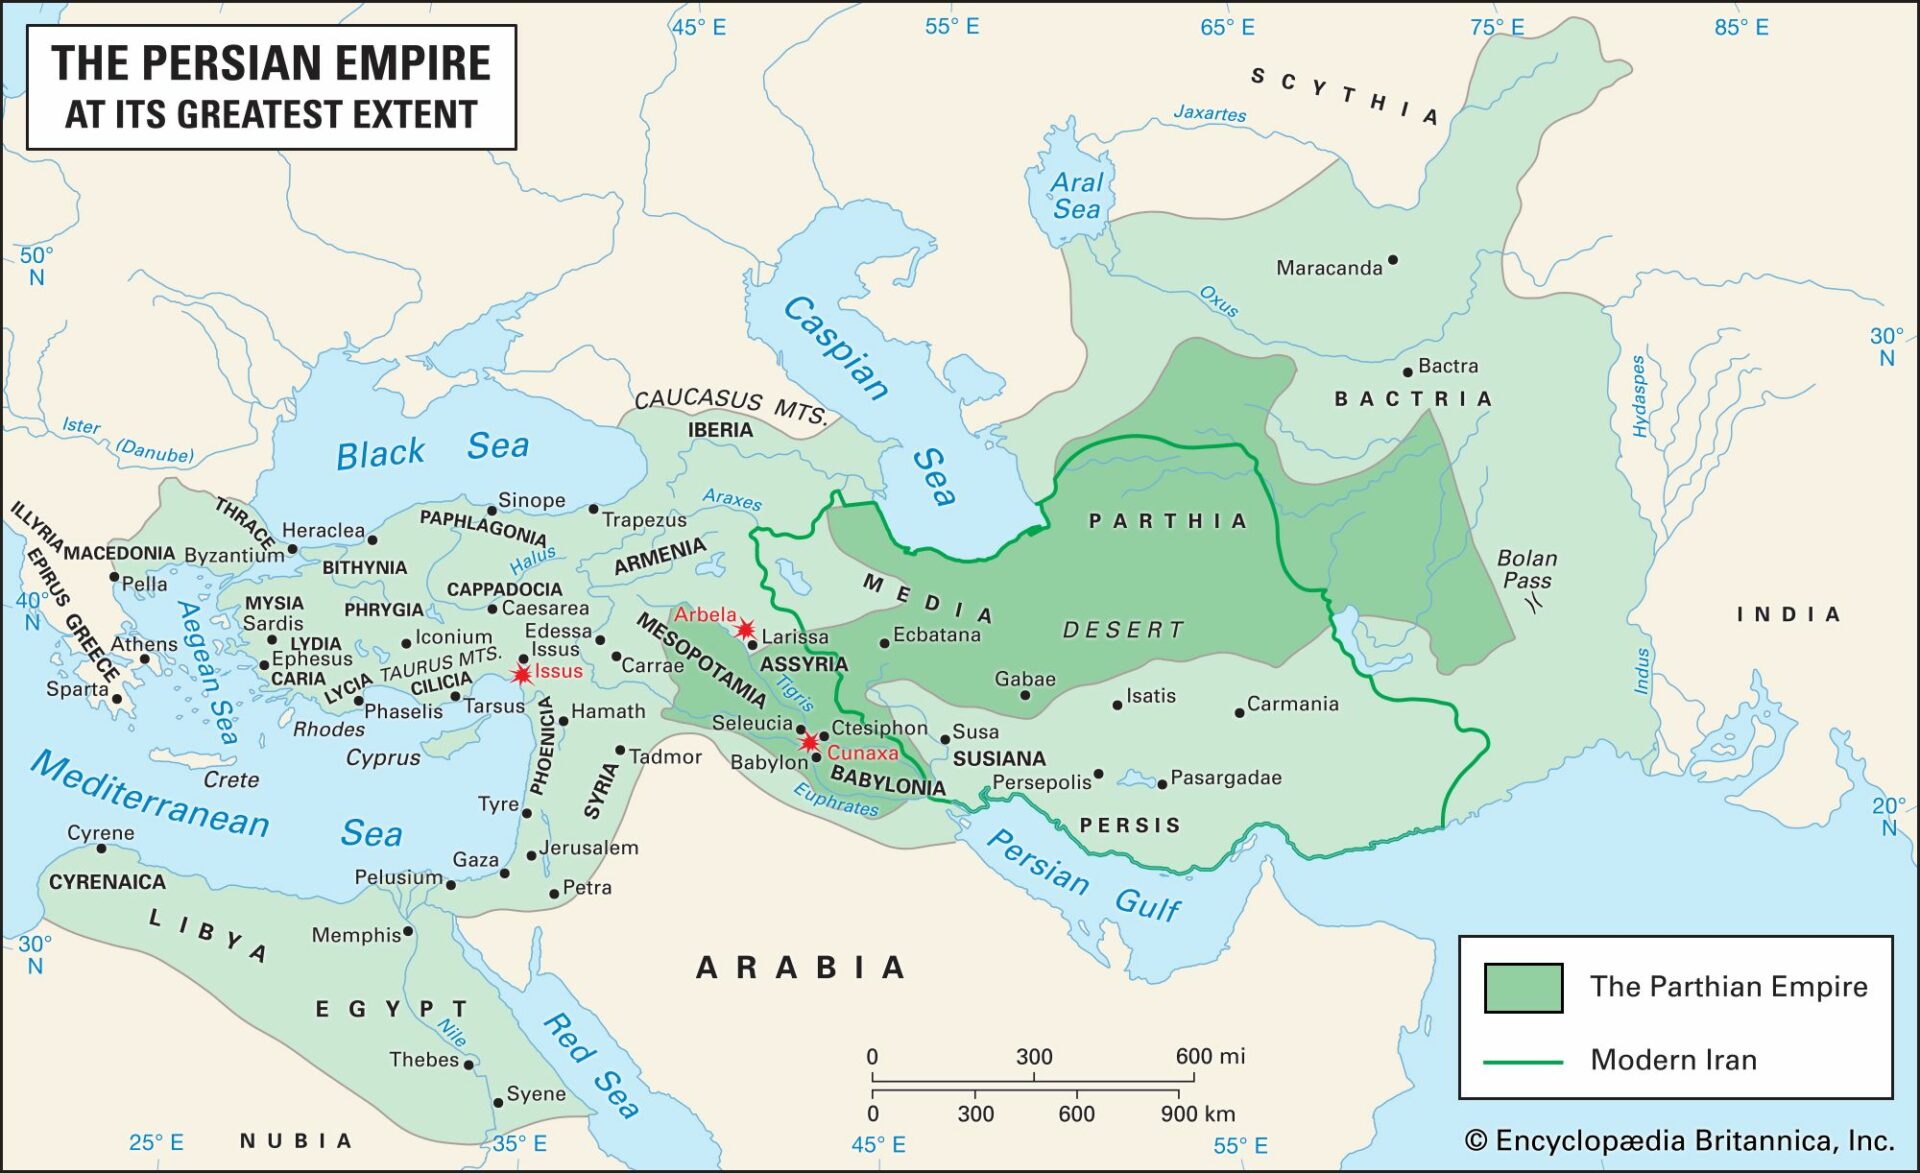 Motives for Empire | Modern Empires and Imperialism